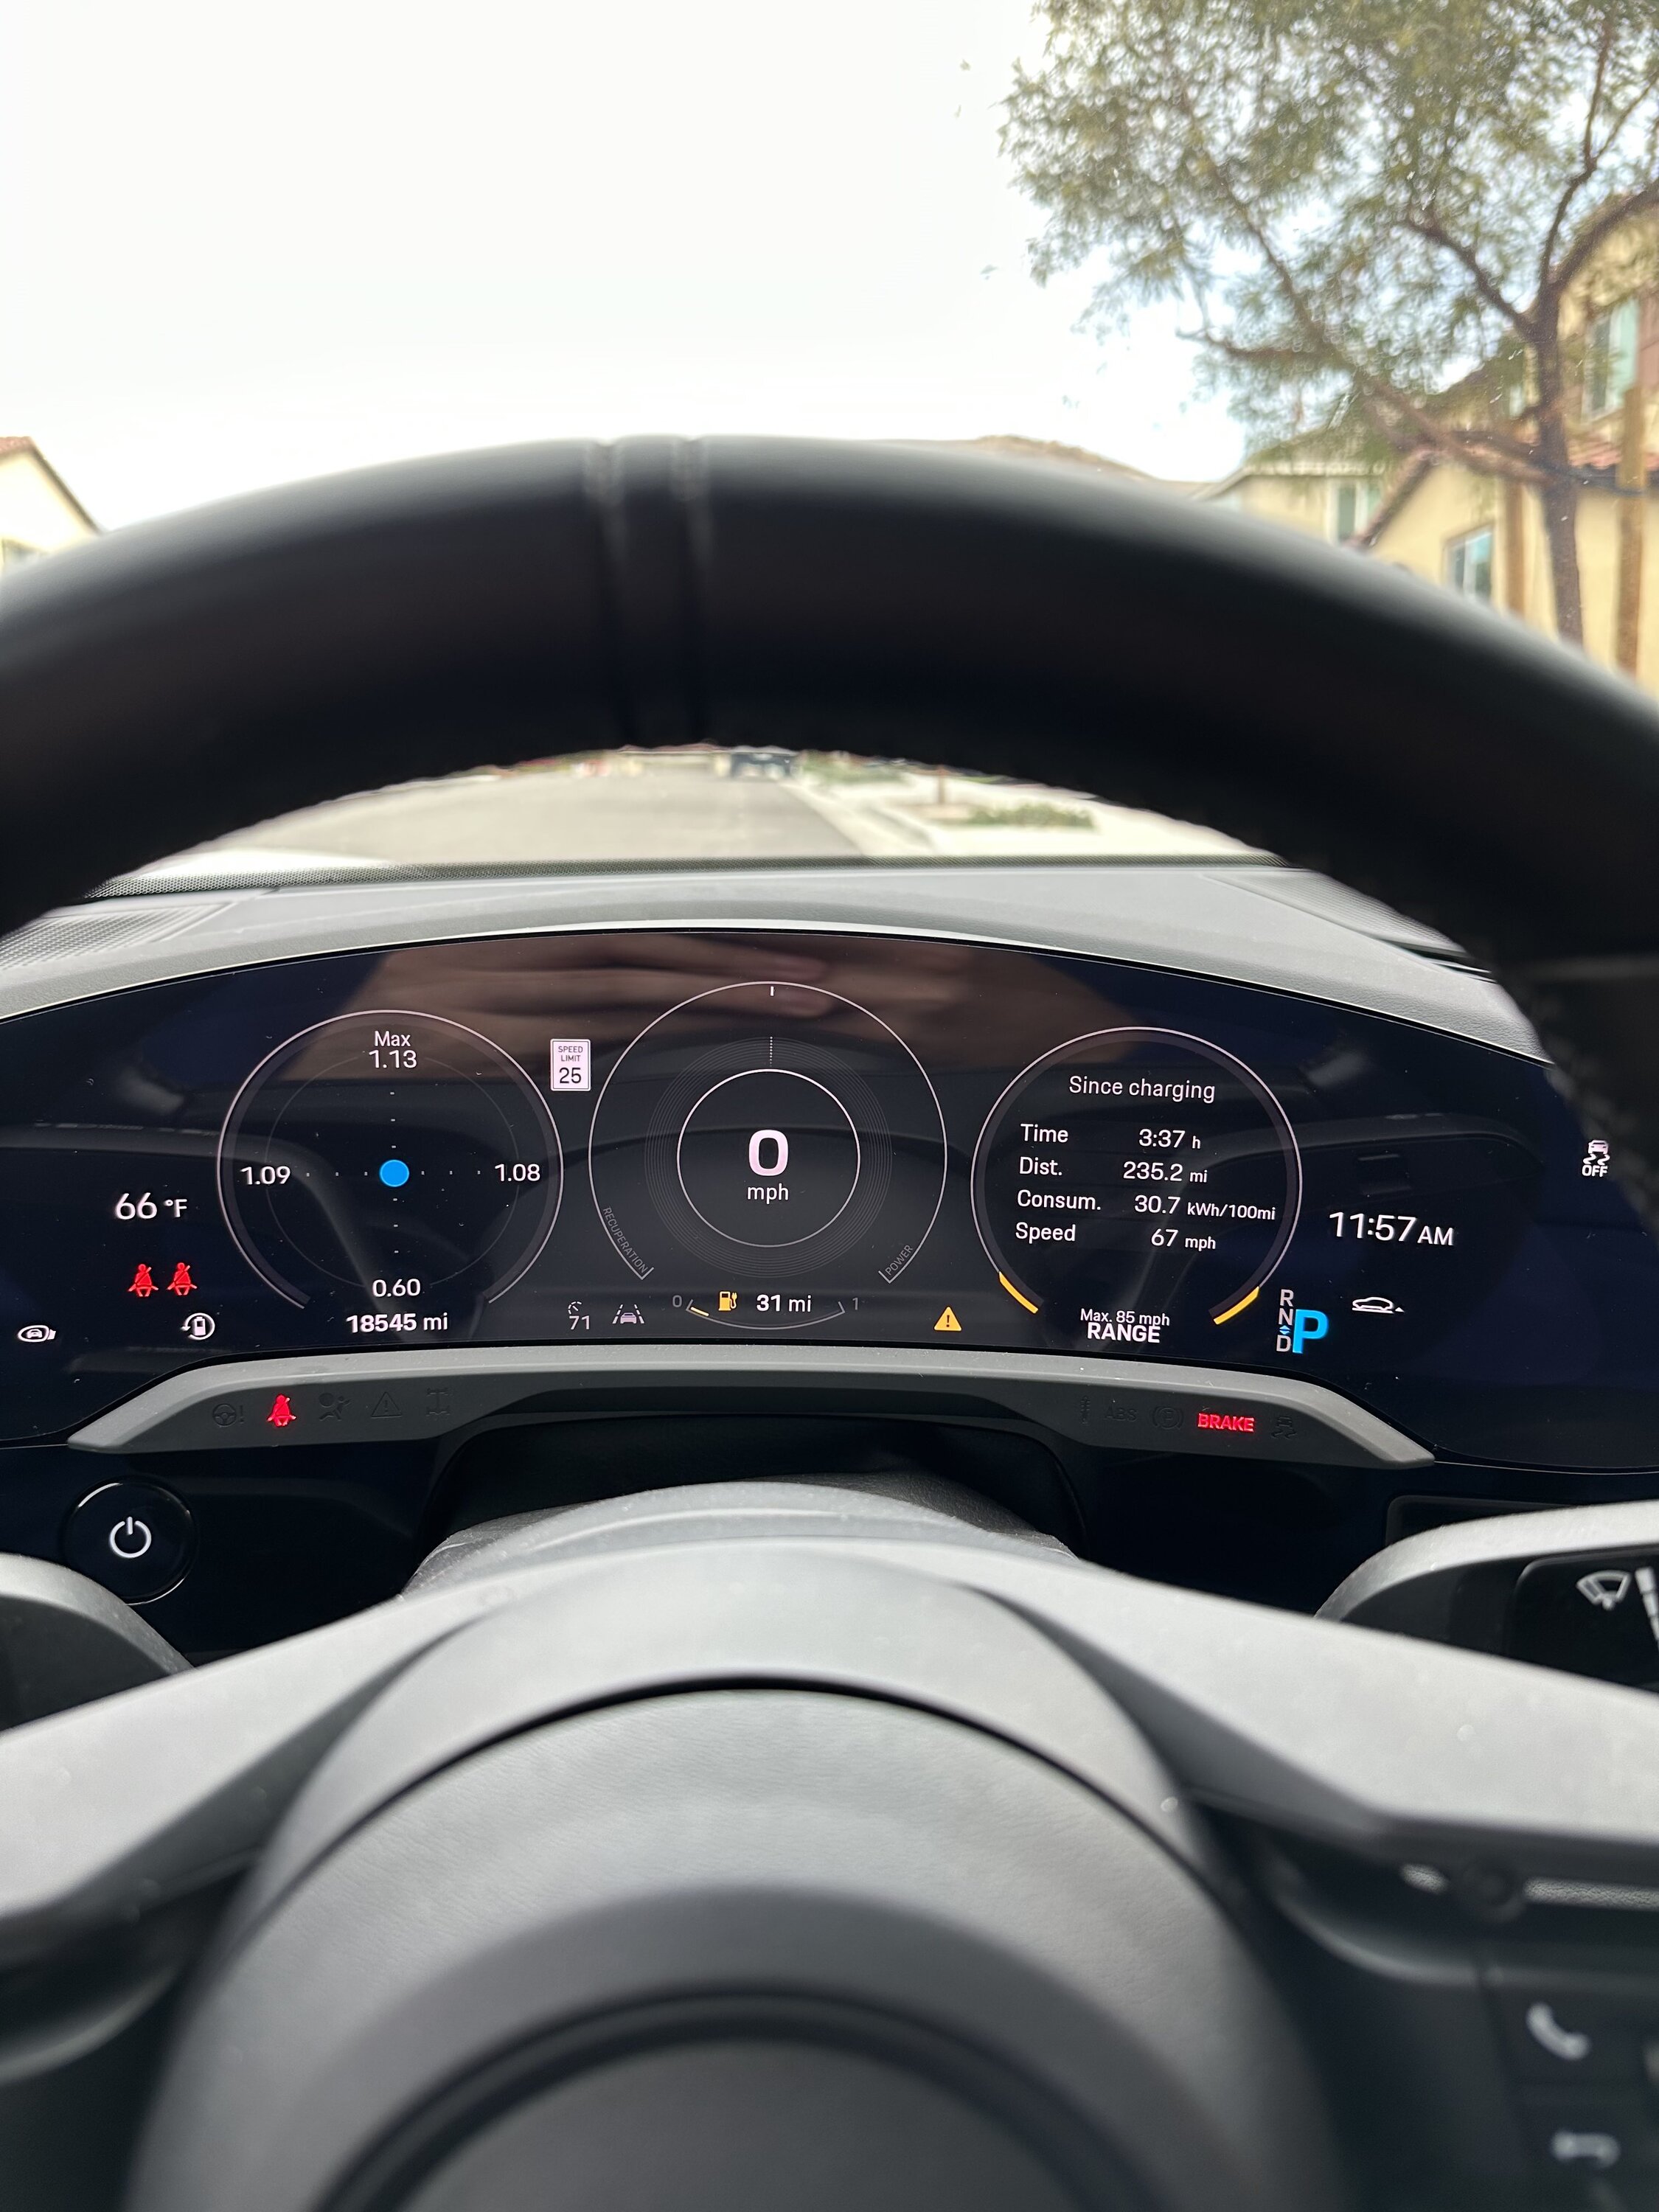 Porsche Taycan Lake Elsinore to San Francisco on One Charge (425.6 Miles) Kettleman to Elsinore